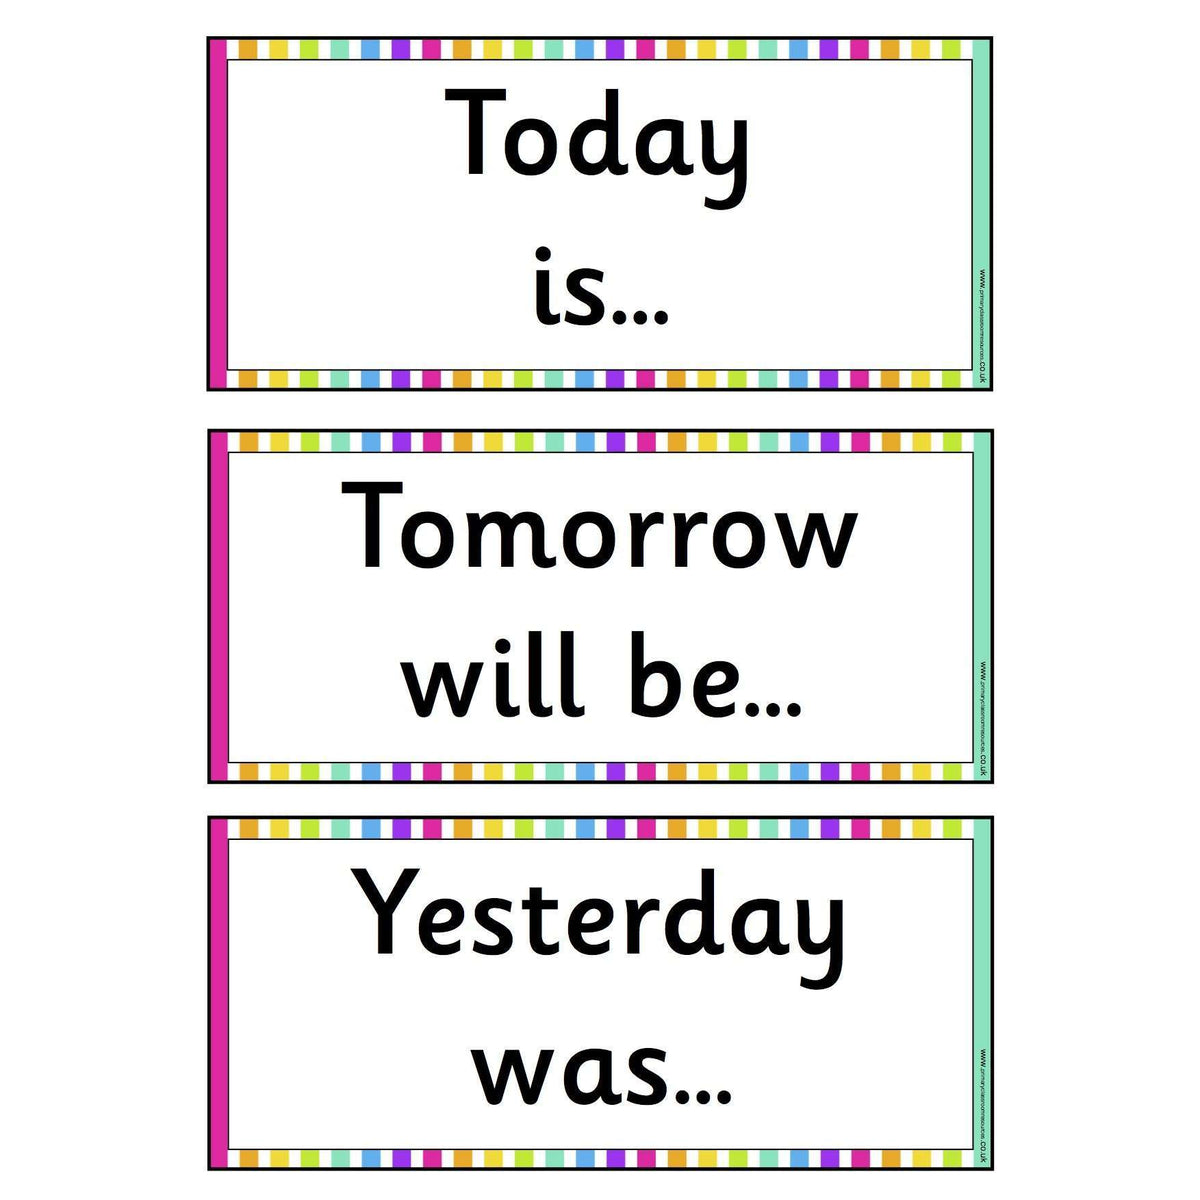 rainbow-visual-timetable-today-tomorrow-and-yesterday-plus-days-of